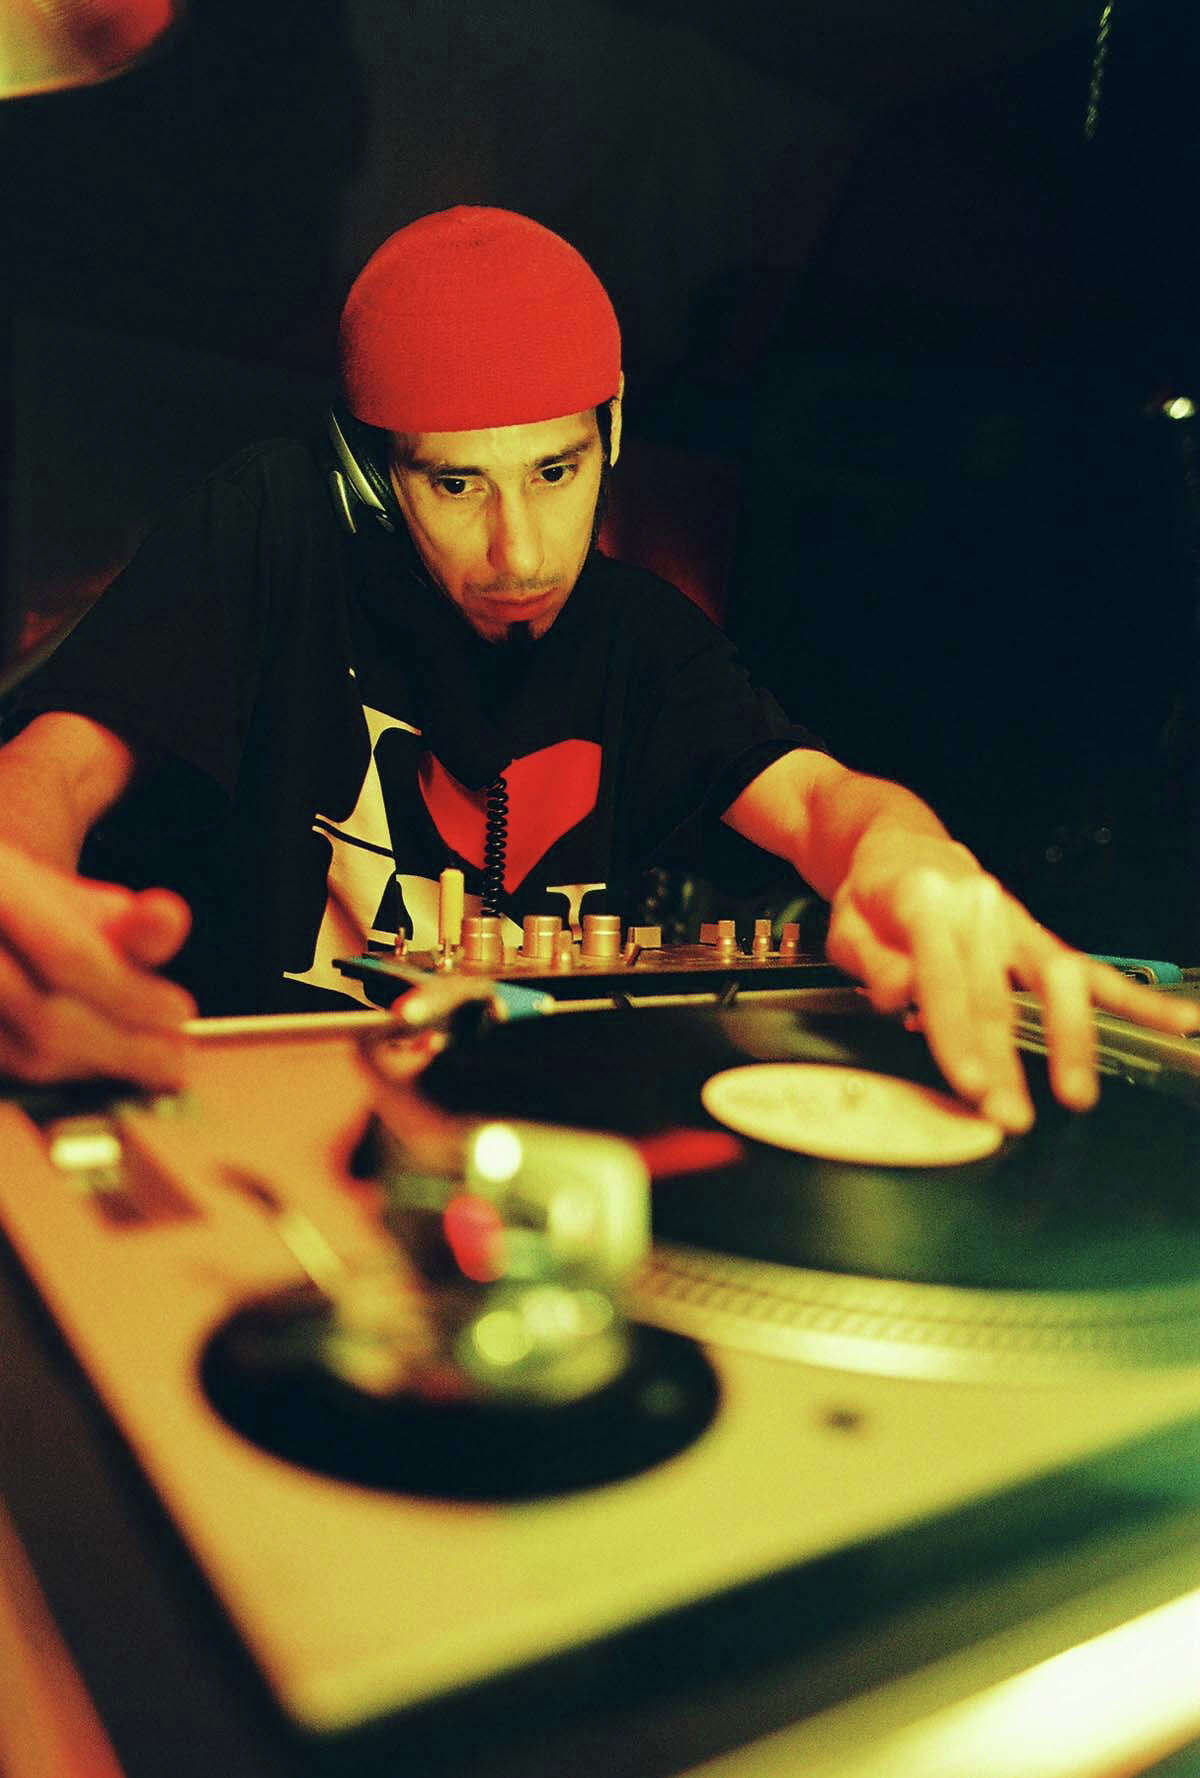 JJ Lopez will be the guest DJ at the Alamo City Soul Club Friday at the War Room. Courtesy photo